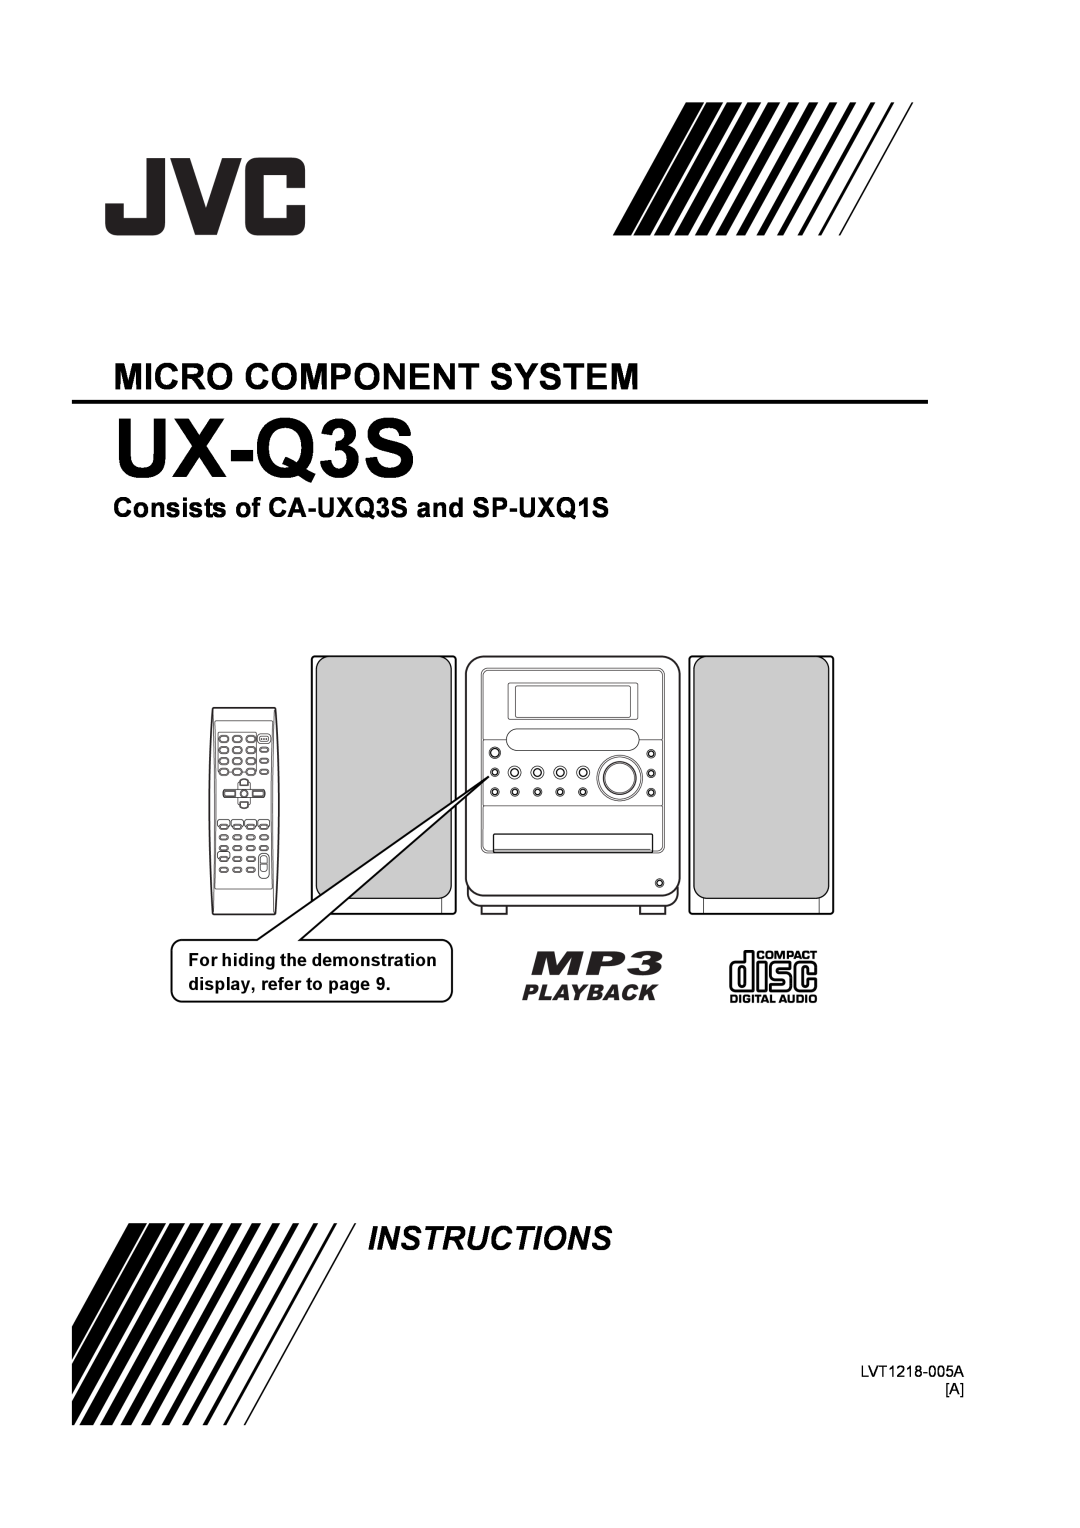 JVC LVT1218-005A manual UX-Q3S, Micro Component System, Instructions, Consists of CA-UXQ3S and SP-UXQ1S 